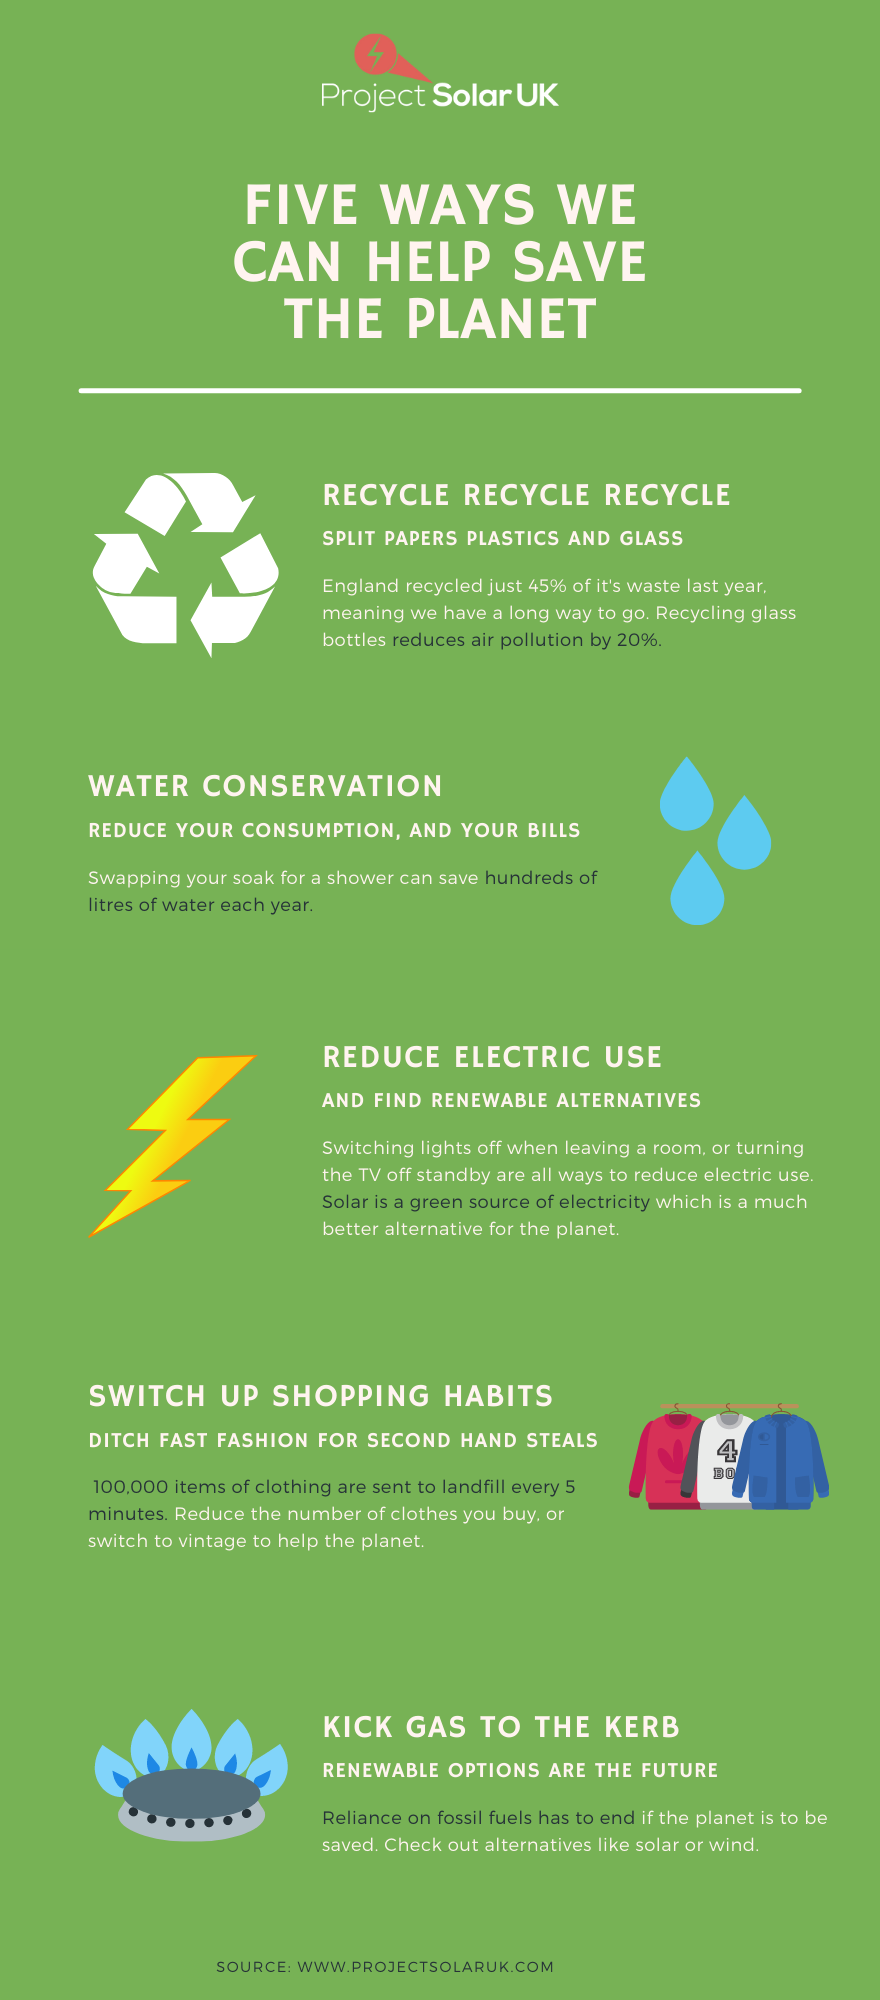 Top Ways To Contribute To Saving The Planet According To Newcastle Research